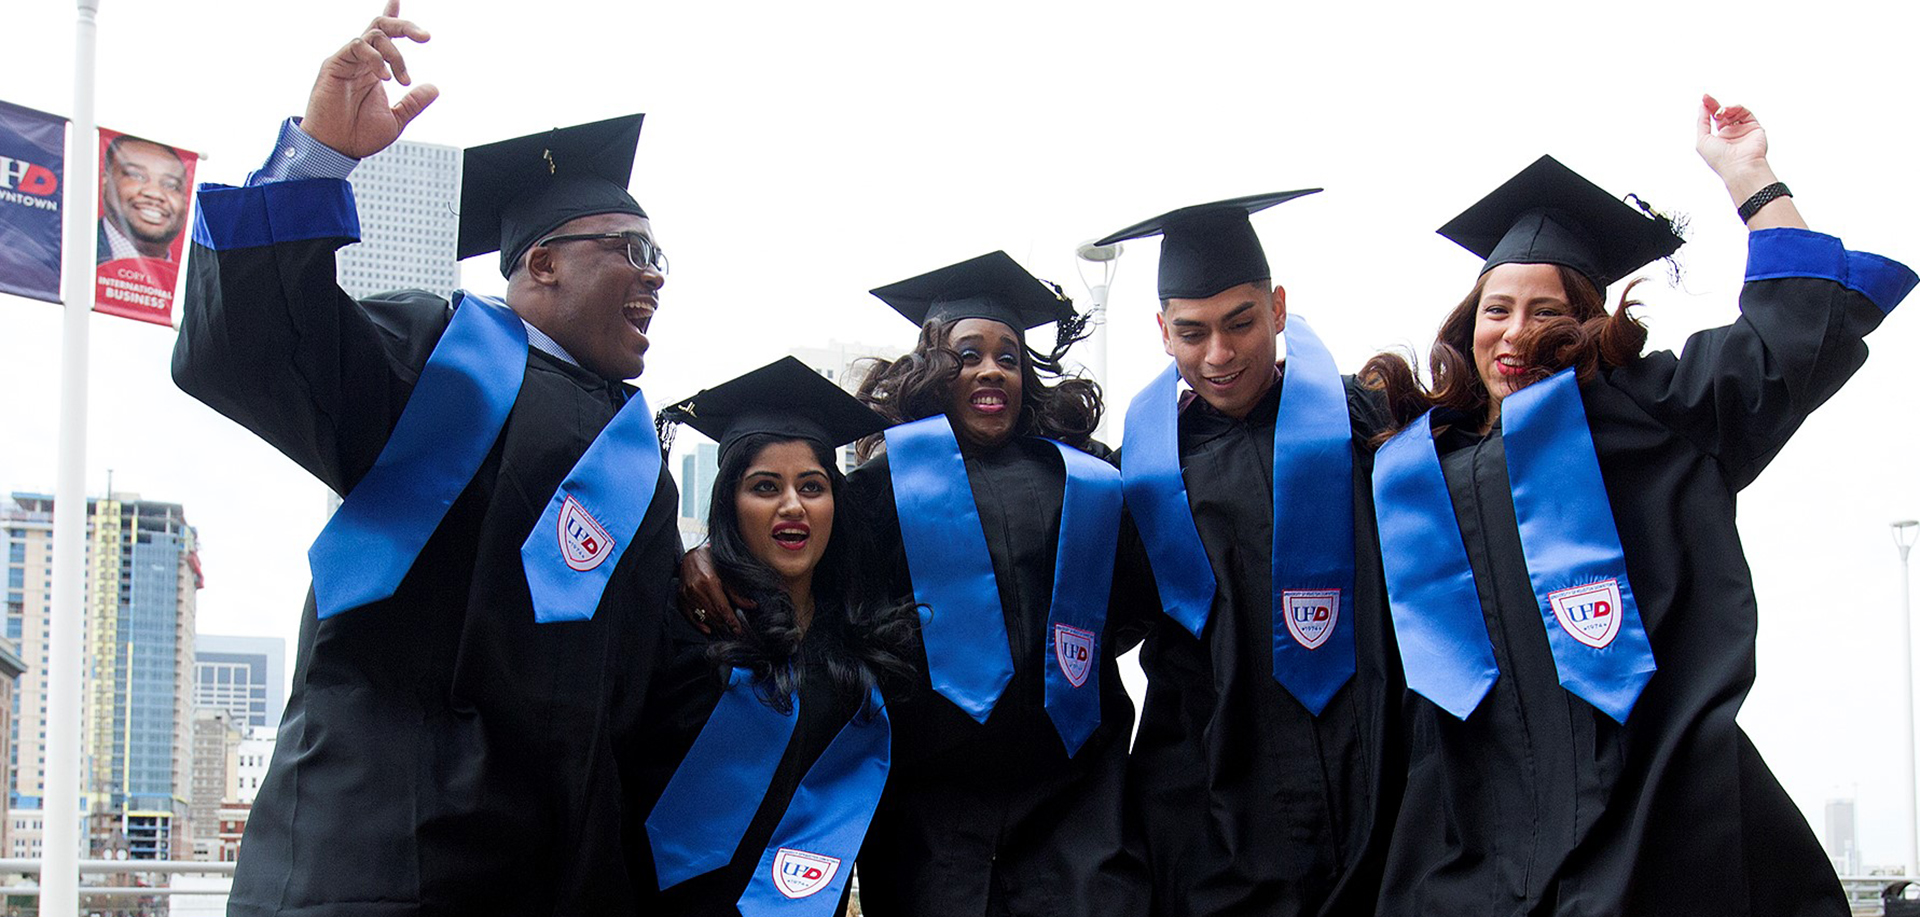 Houston is the place to be for recent graduates, Gusto report says